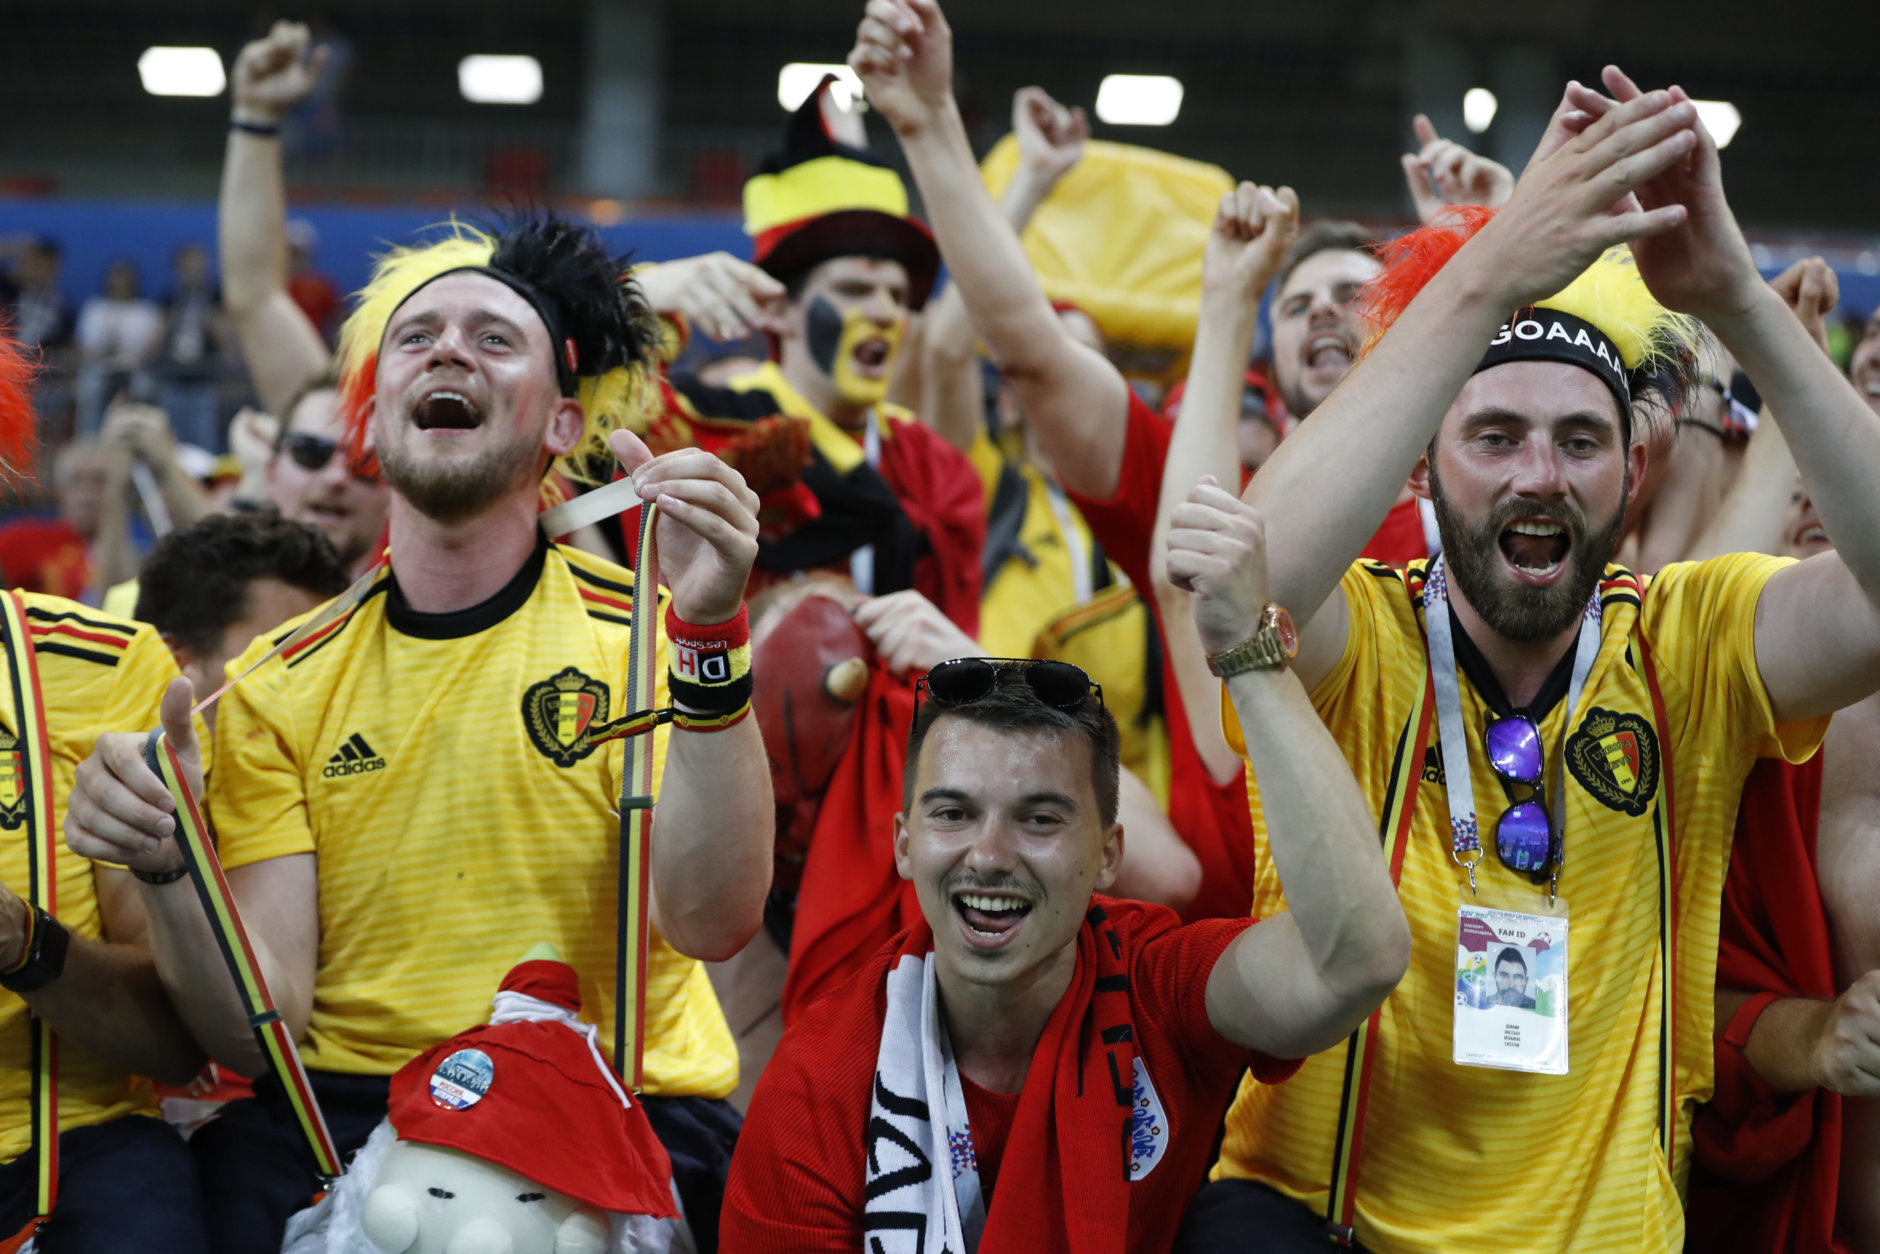 Belgium's fans celebrate their team victory over Japan during the round of 16 match between Belgium and Japan at the 2018 soccer World Cup in the Rostov Arena, in Rostov-on-Don, Russia, Monday, July 2, 2018. (AP Photo/Rebecca Blackwell)